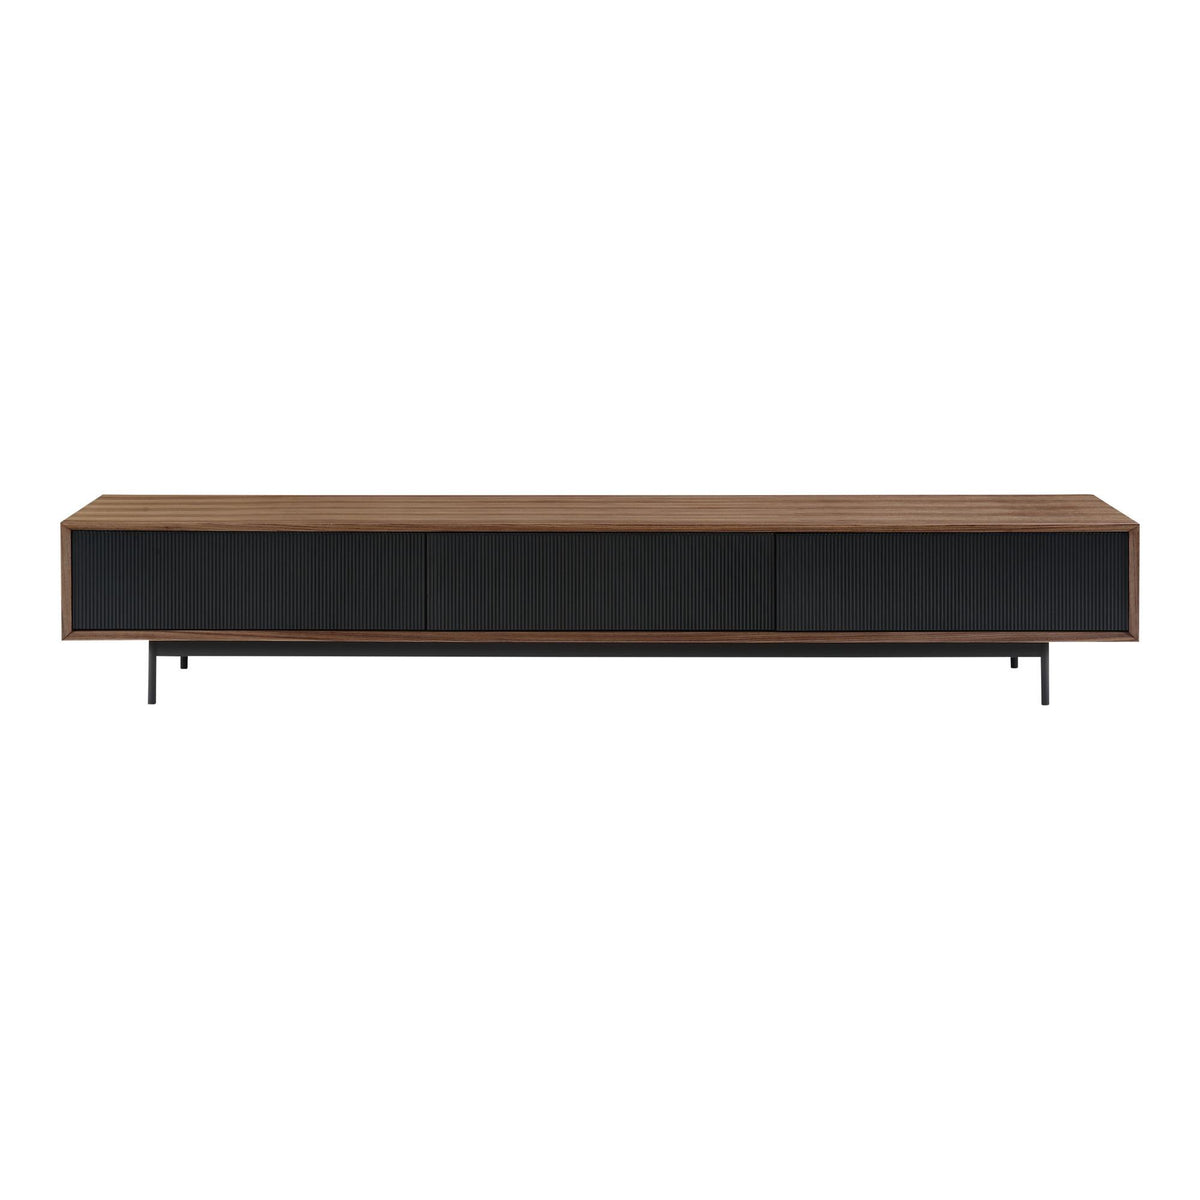 Moe's Home Collection Araya Media Cabinet - PX-1011-03